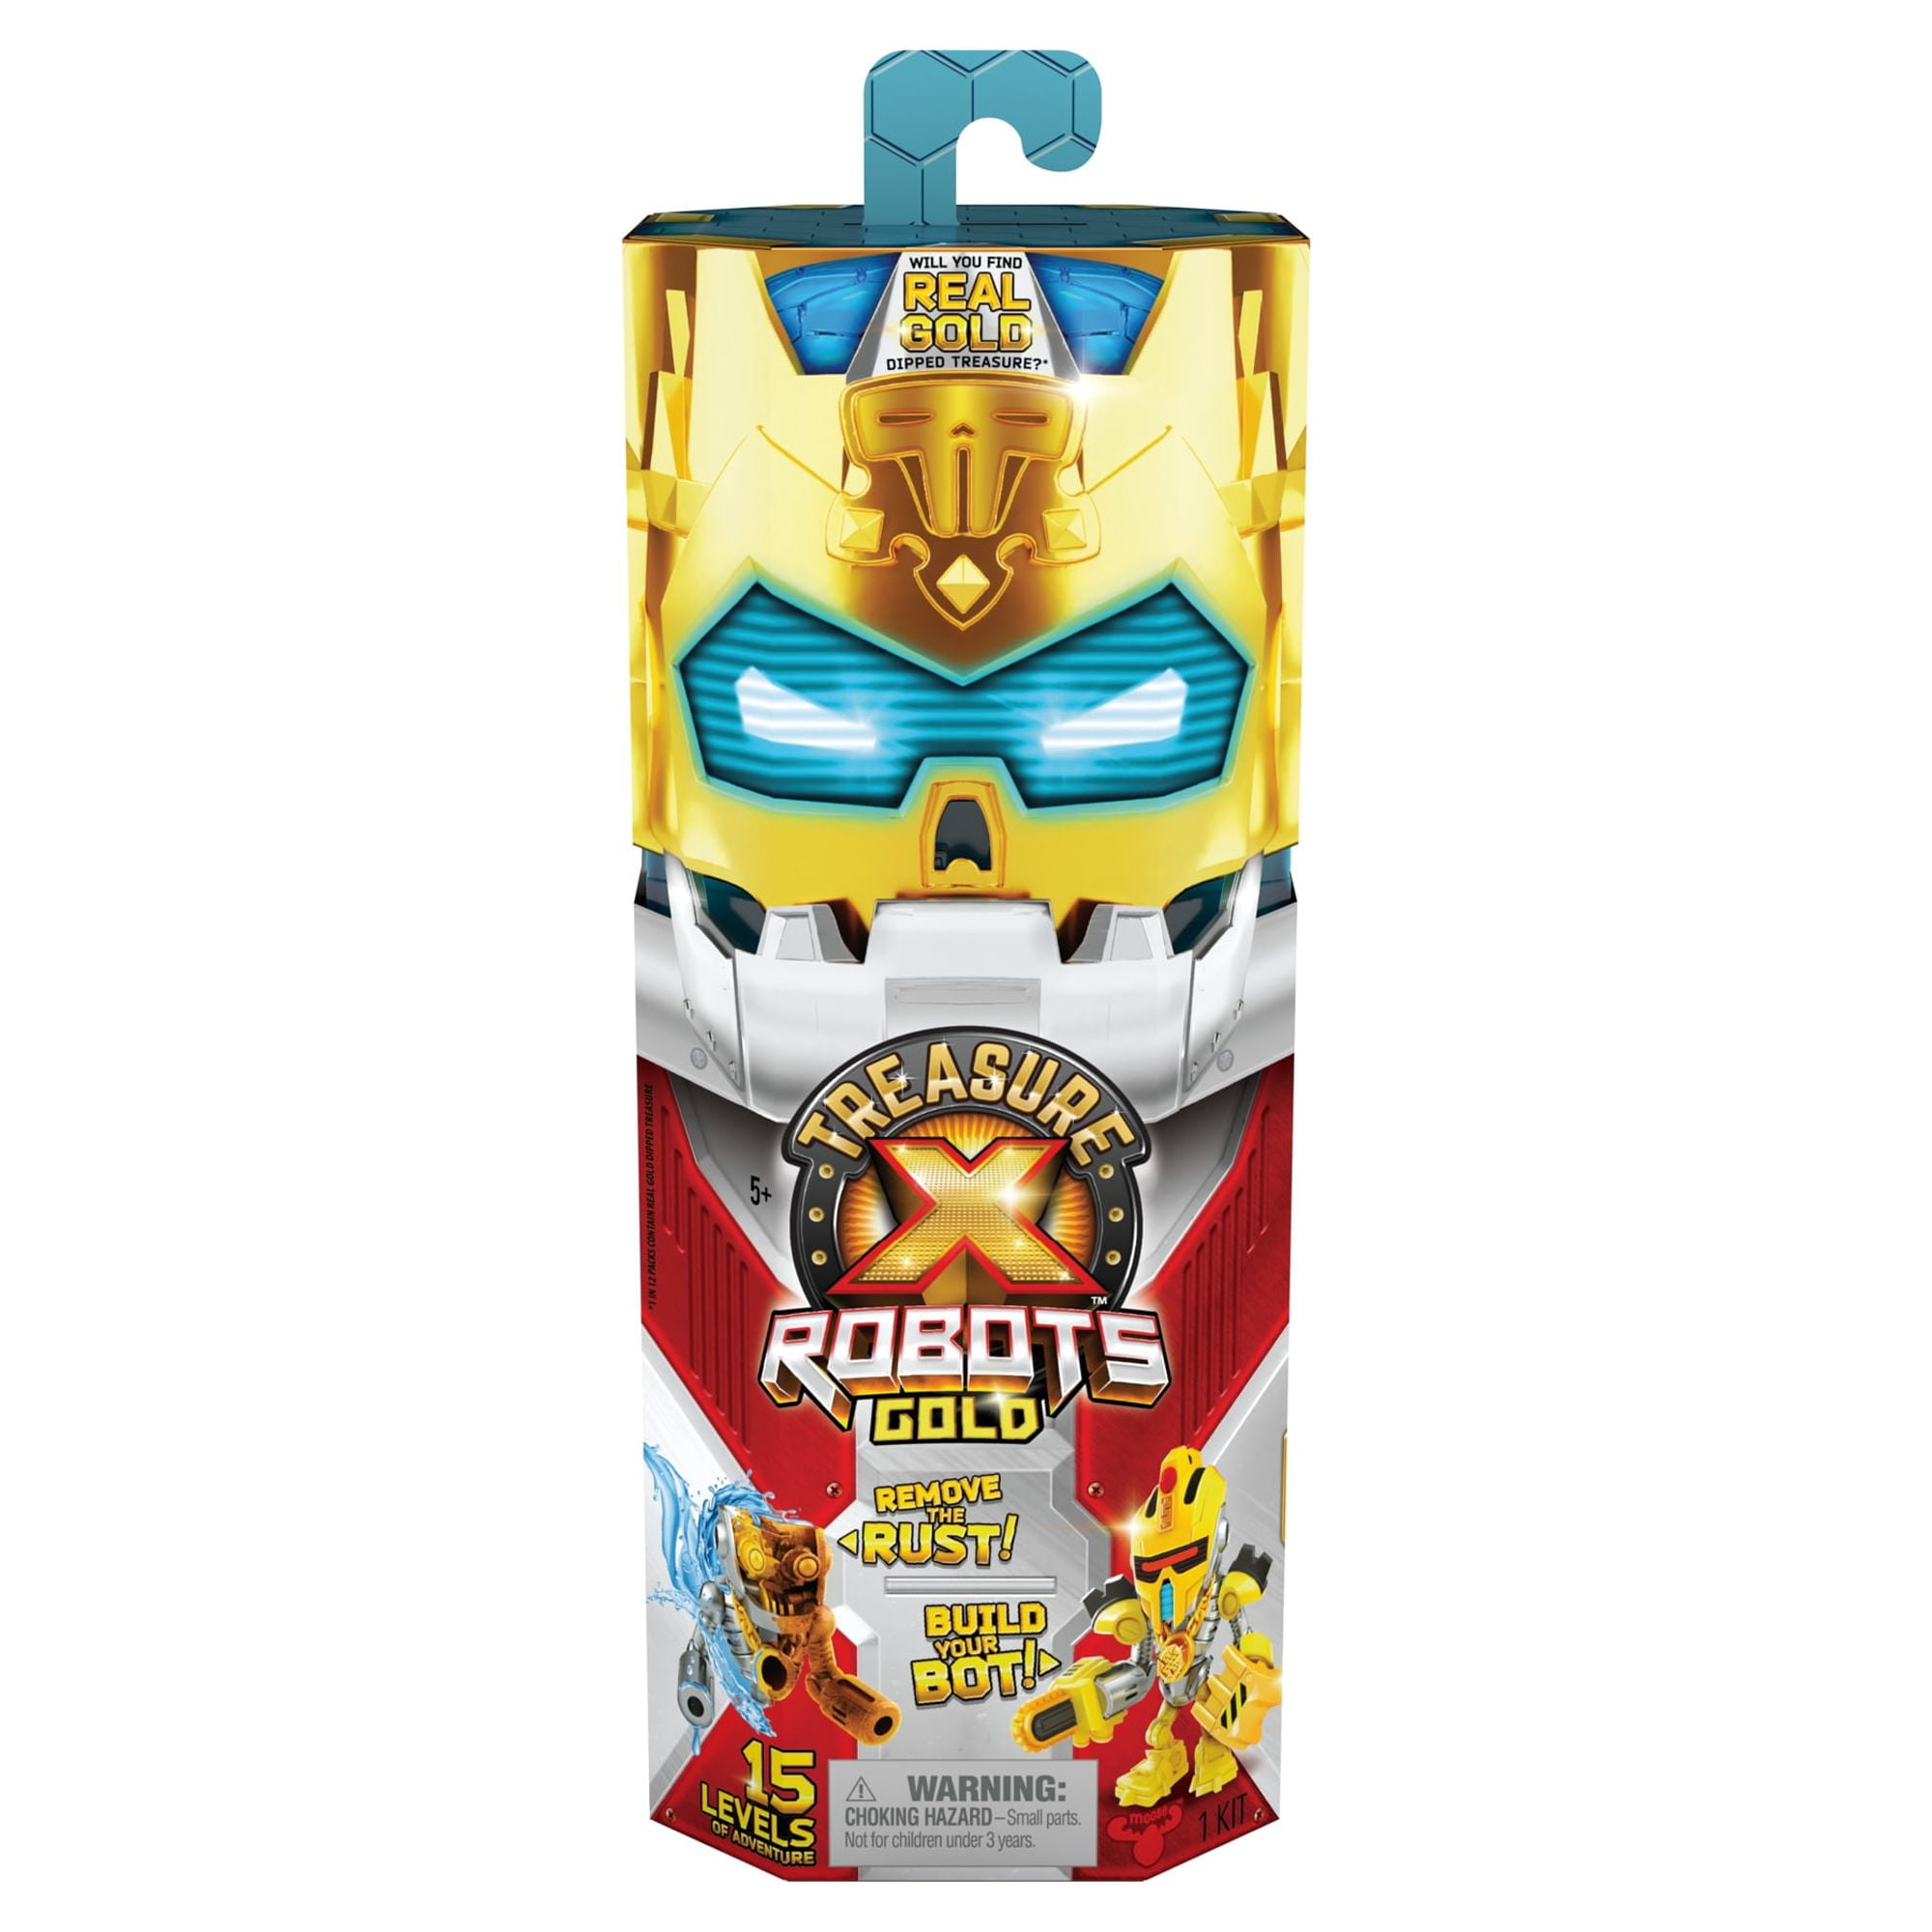 Treasure X Robots Gold 6 Robots To Discover, Ages 5+, Styles May